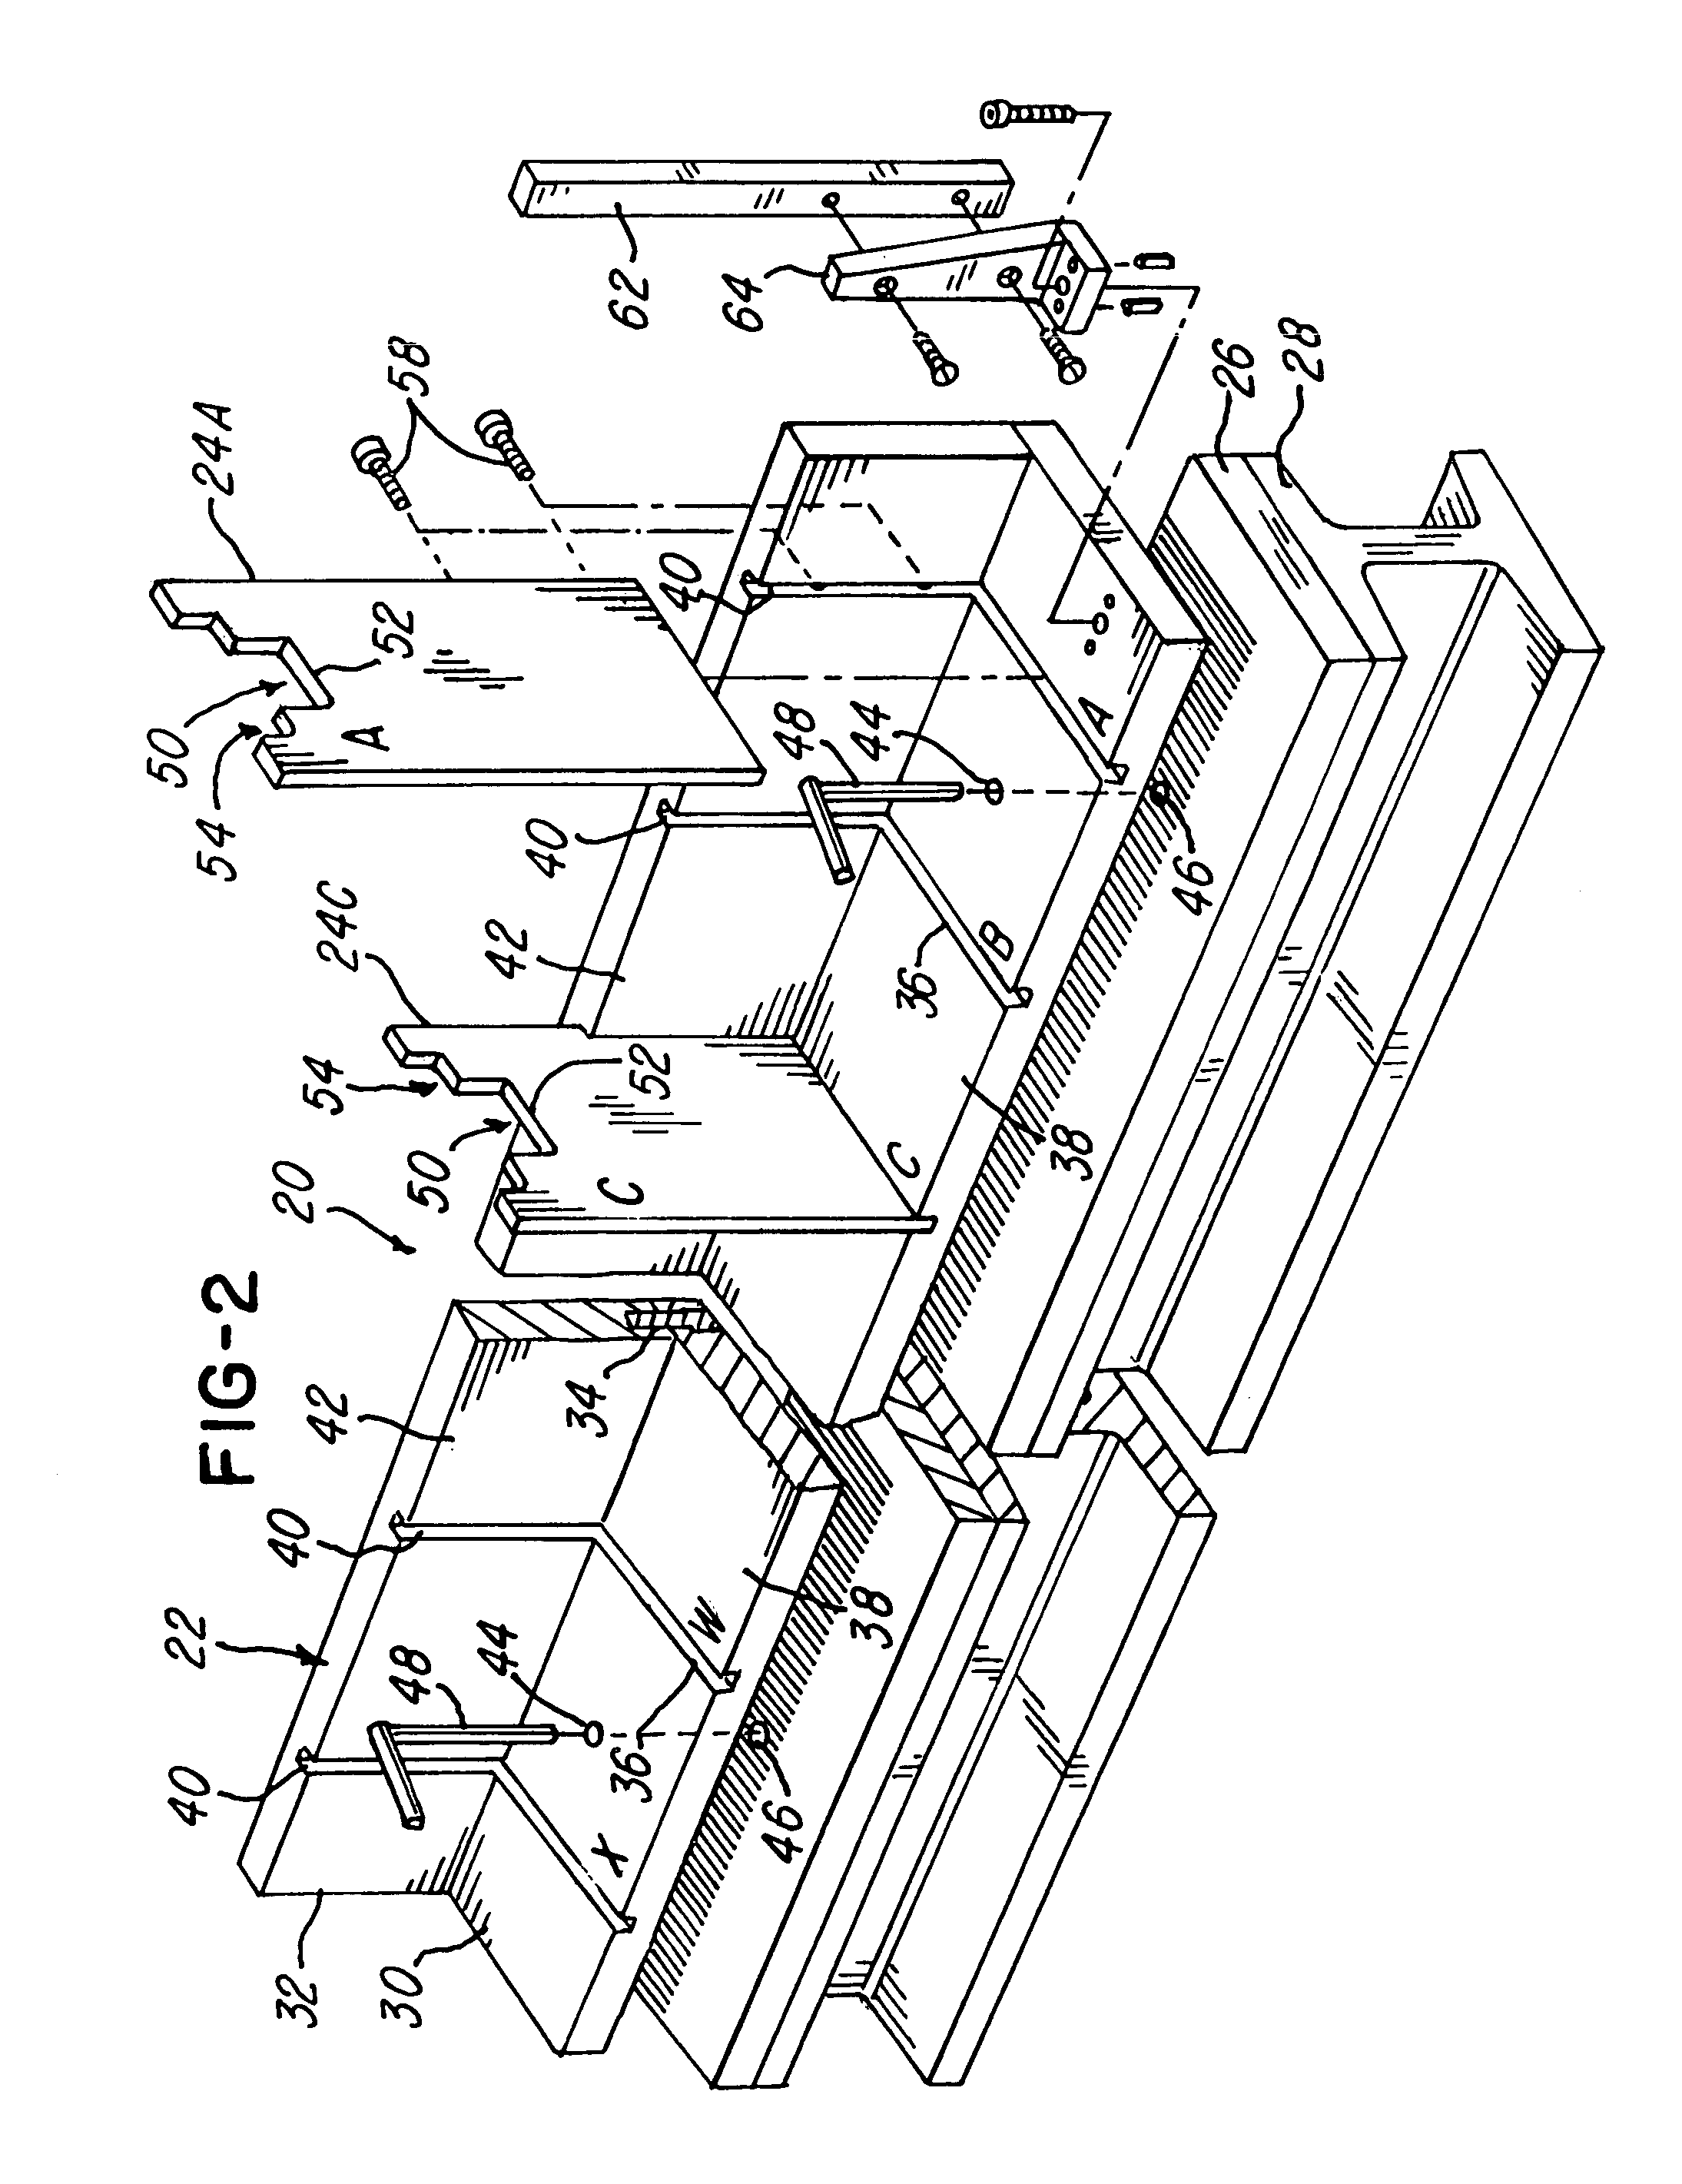 Stringer check fixture and method